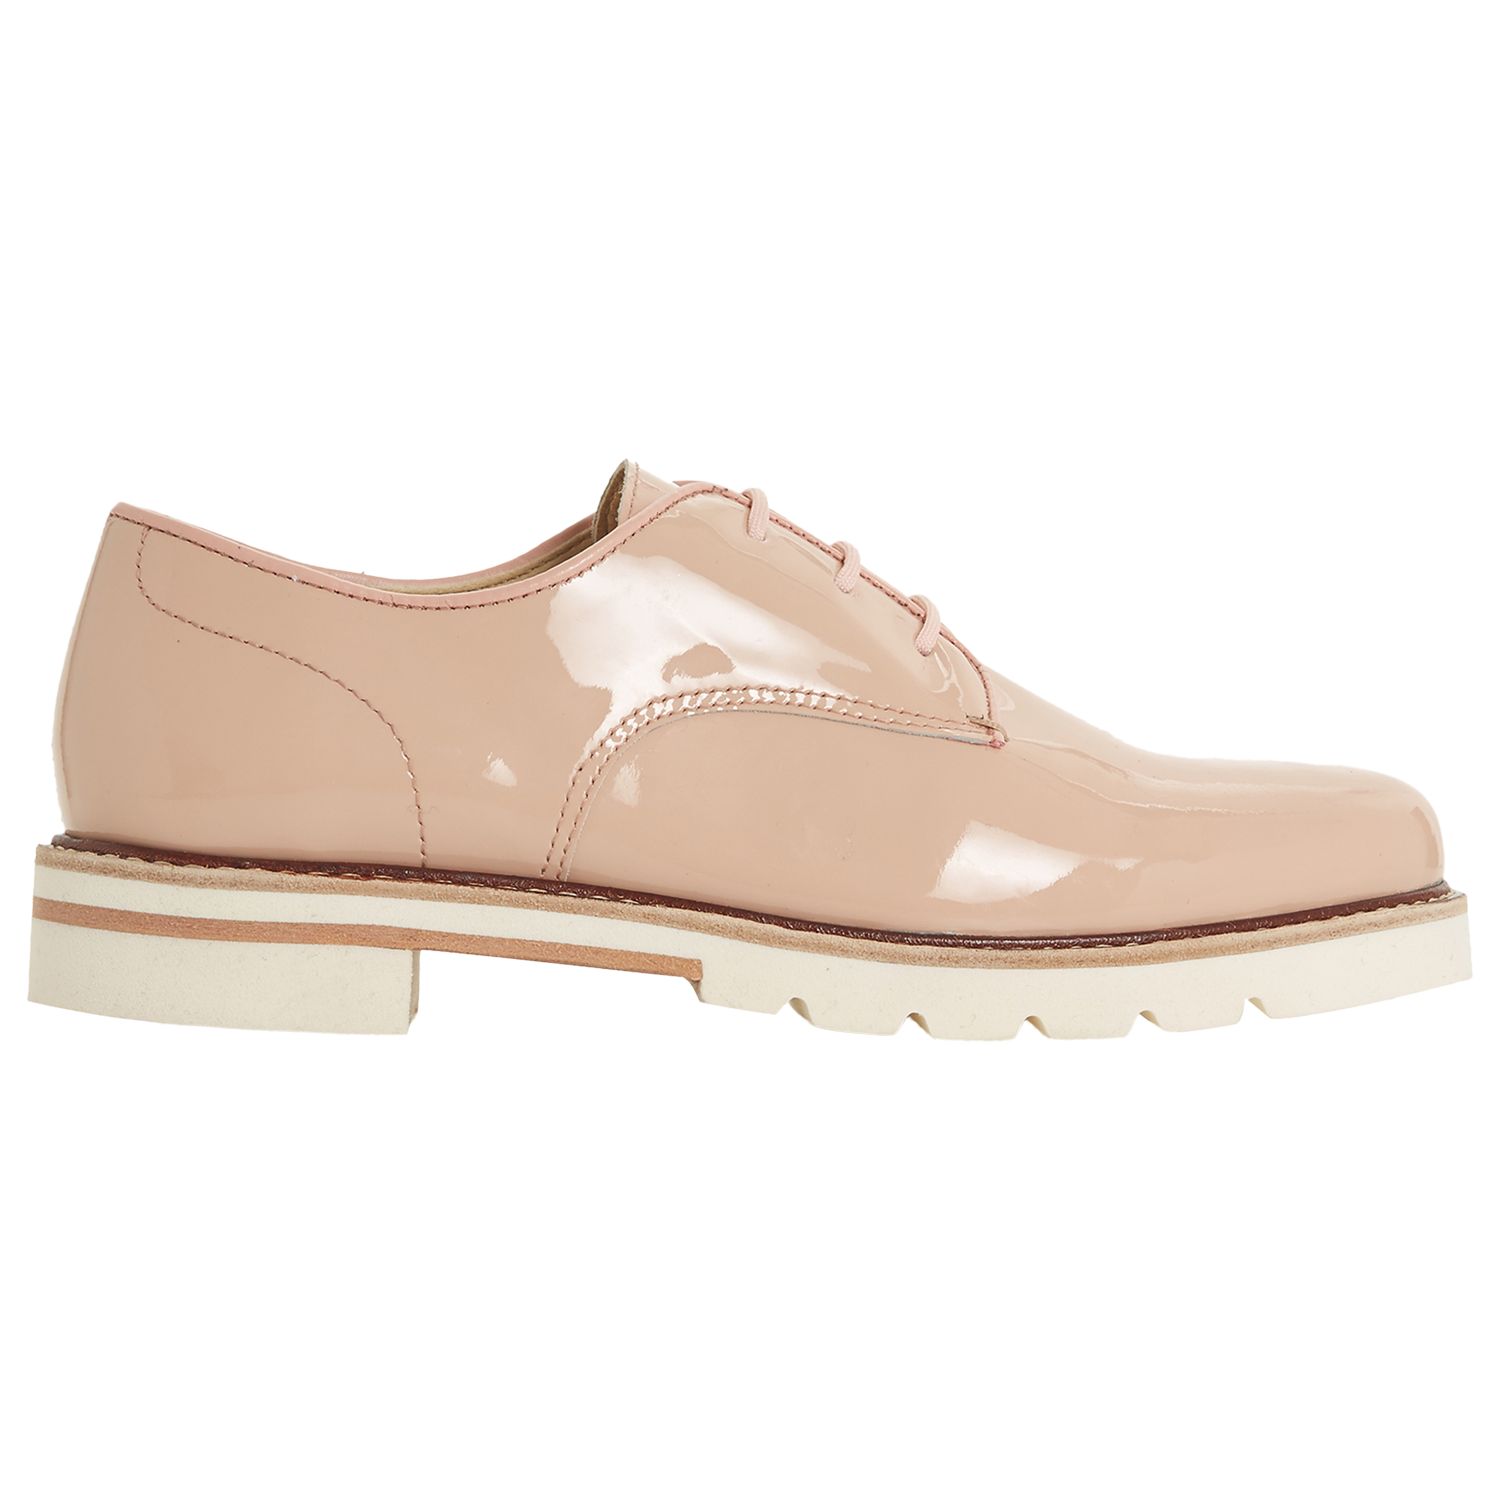 Dune Finnly Lace Up Brogues